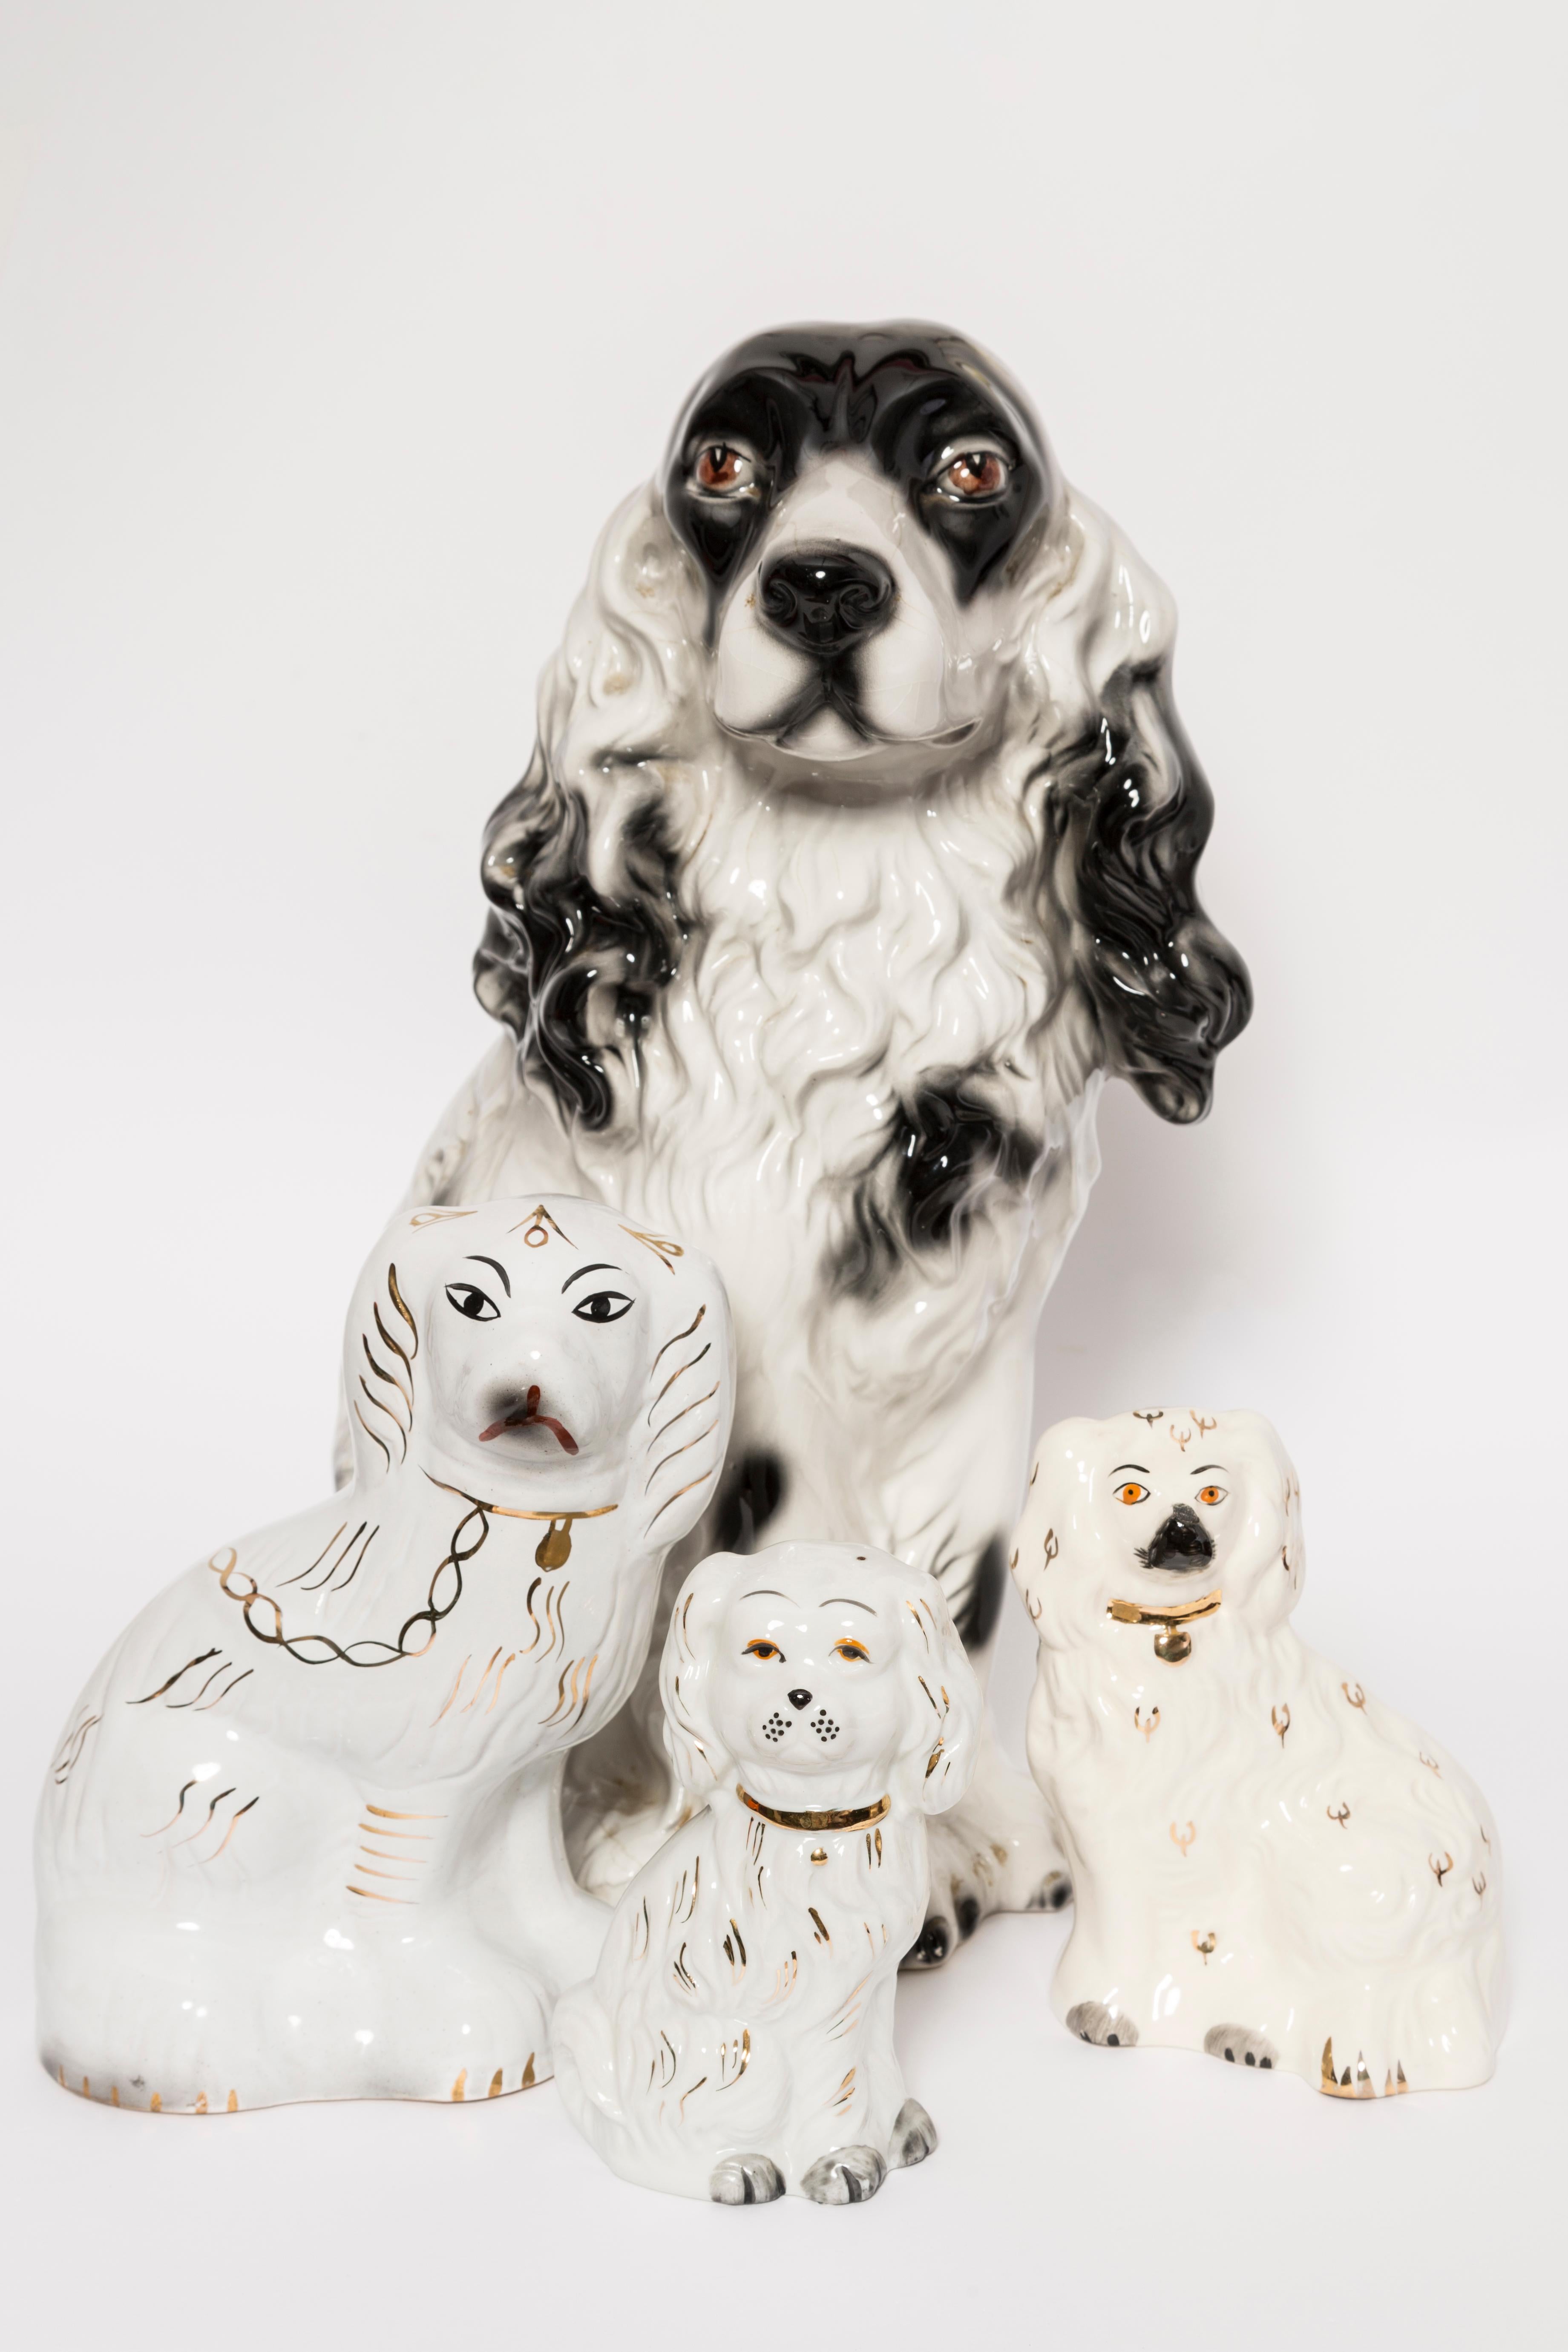 Painted ceramic/terracotta, good original vintage condition. Beautiful and unique decorative sculpture. Spaniel dog was produced in 1960s in Italy.